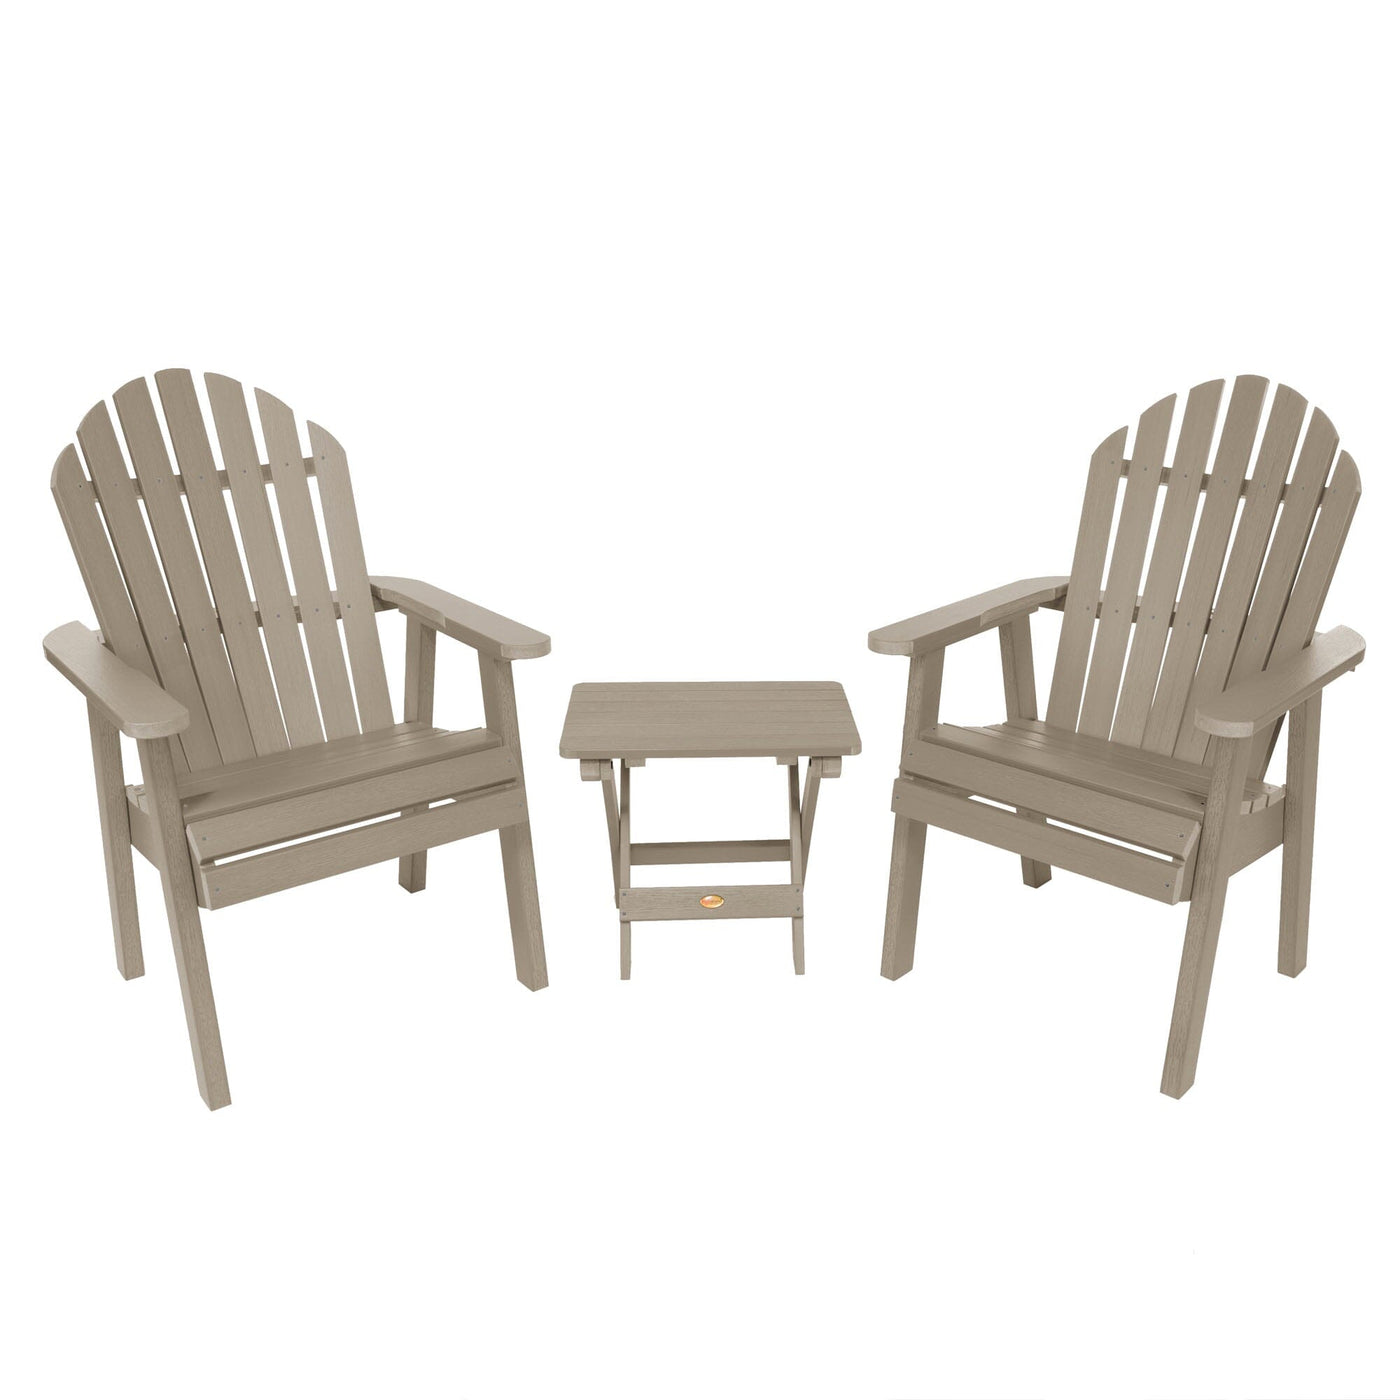 2 Hamilton Deck Chairs with Folding Side Table Kitted Sets Highwood USA Woodland Brown 